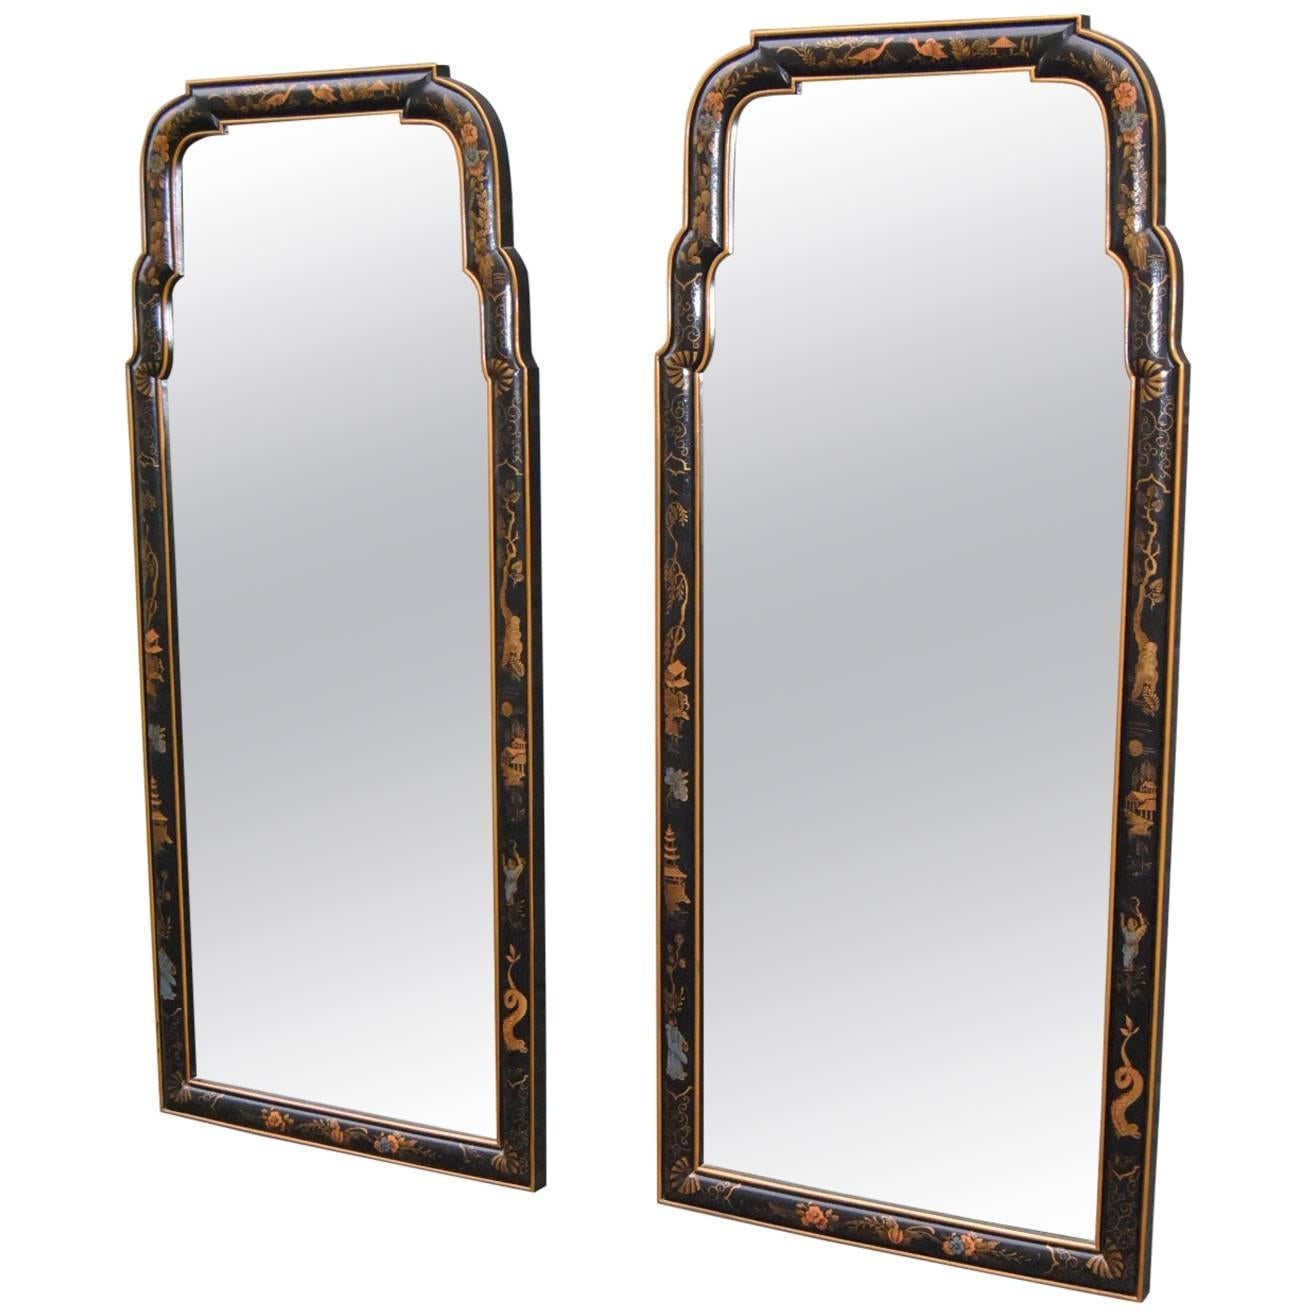 Pair of Asian Style Chinoiserie Drexel Mirrors Black with Gold Painted Scenes